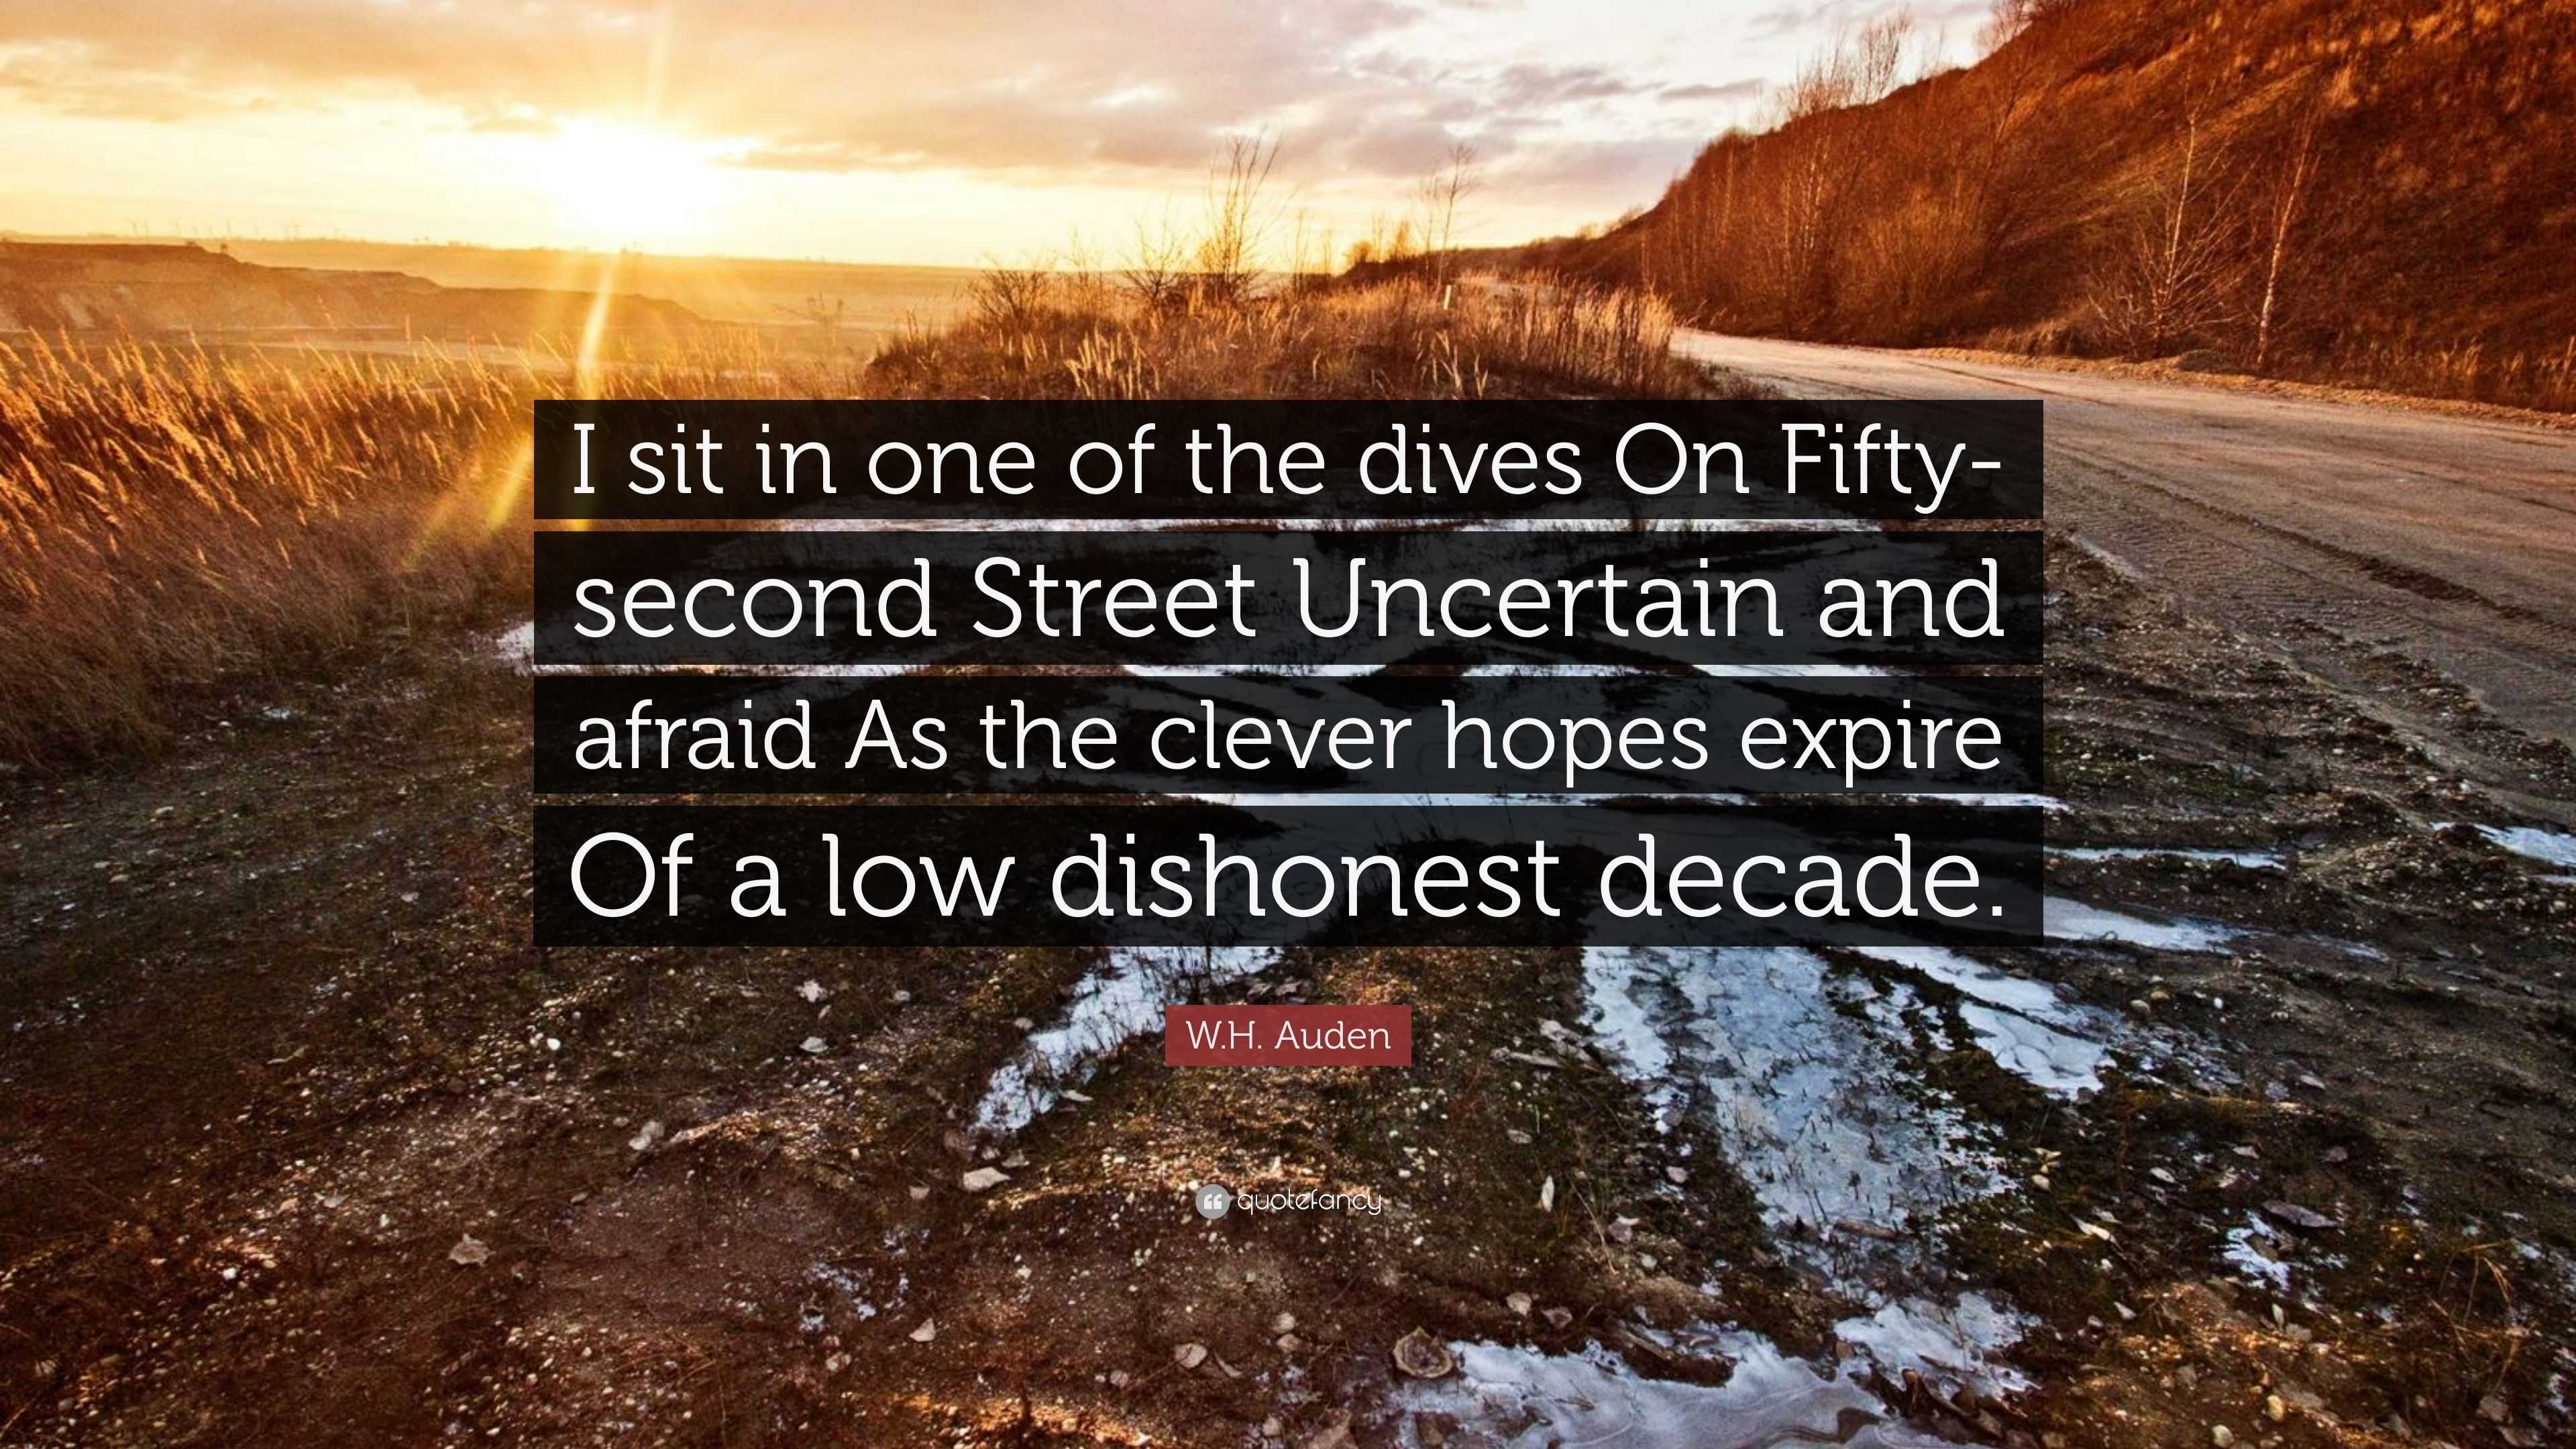 W.H. Auden Quote: “I sit in one of the dives On Fifty-second 